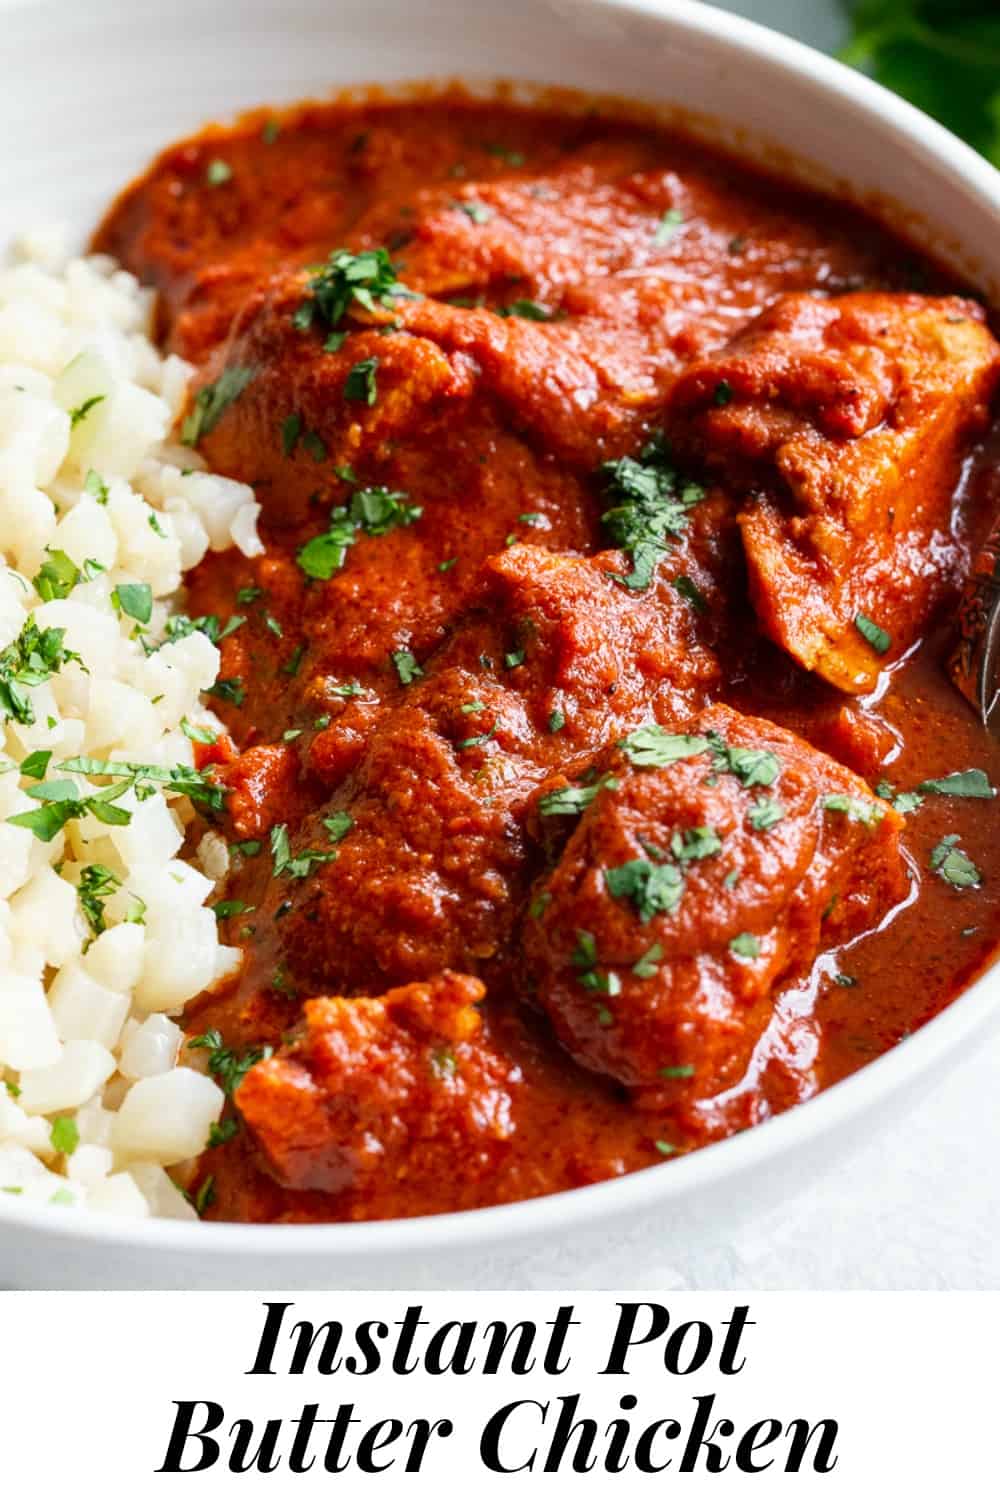 This Instant Pot Indian Butter Chicken is super easy to make and so flavorful!  With just the right amount of spice and a thick creamy tomato sauce, It’s perfect over cauliflower rice to keep it Paleo, Whole30, and keto friendly. #cleaneating #whole30 #paleo #keto